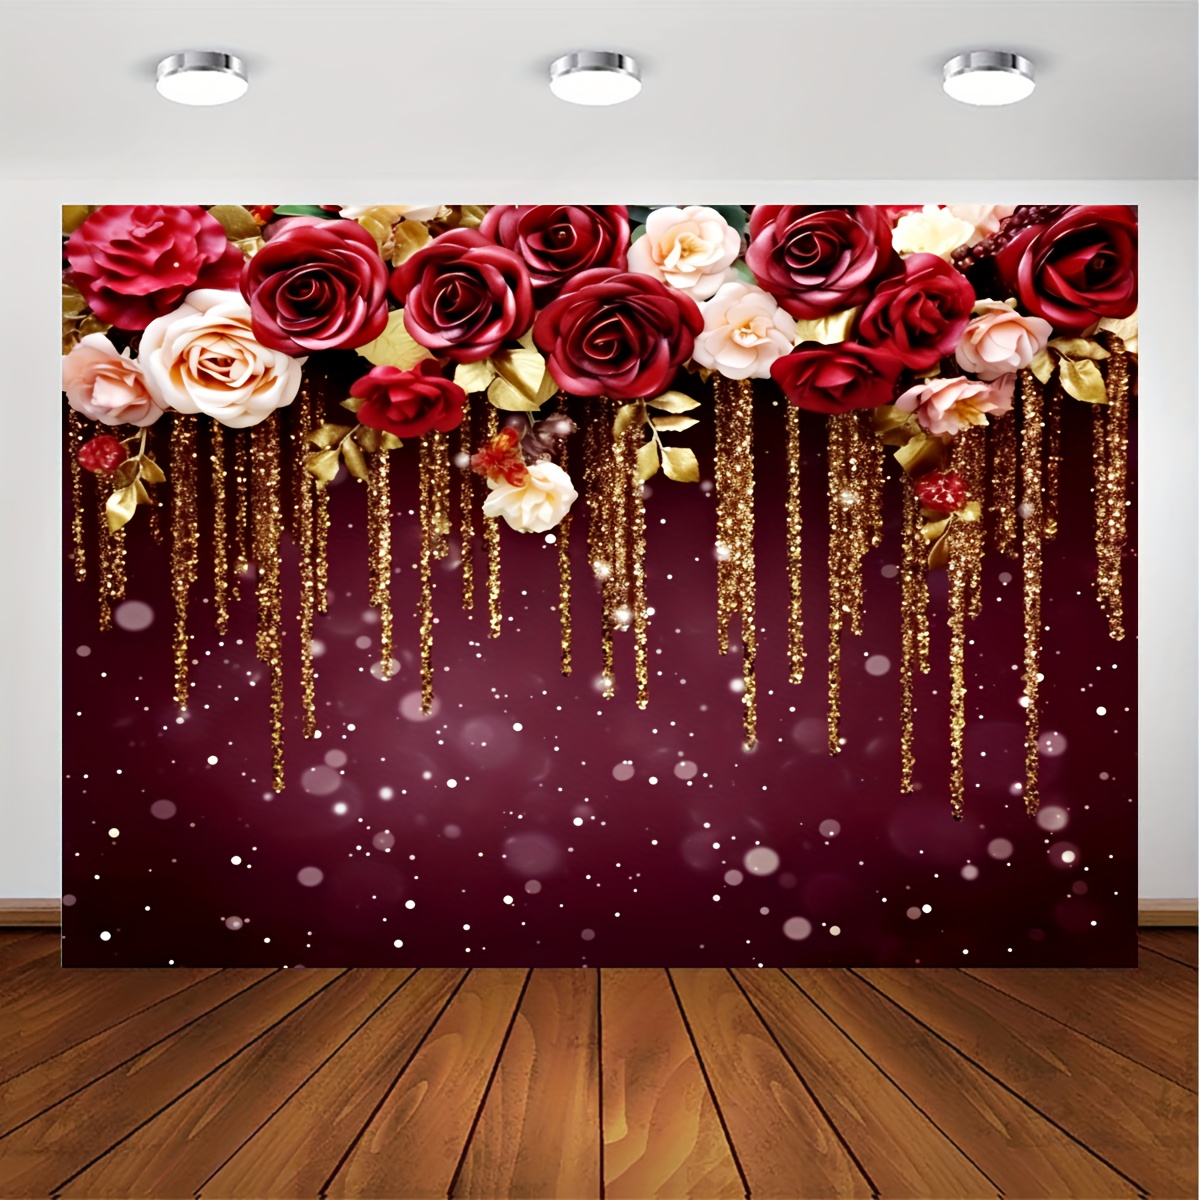 43pcs, Pajama Party Decorations, Rose Golden Burgundy Pajama Party Balloons  For Girls Pj Mask Themed Banner For Pajama Slumber Sleepover Spa Birthday  Bachelor's Party Bridal Hen Adult Party Supplies Kit - Home